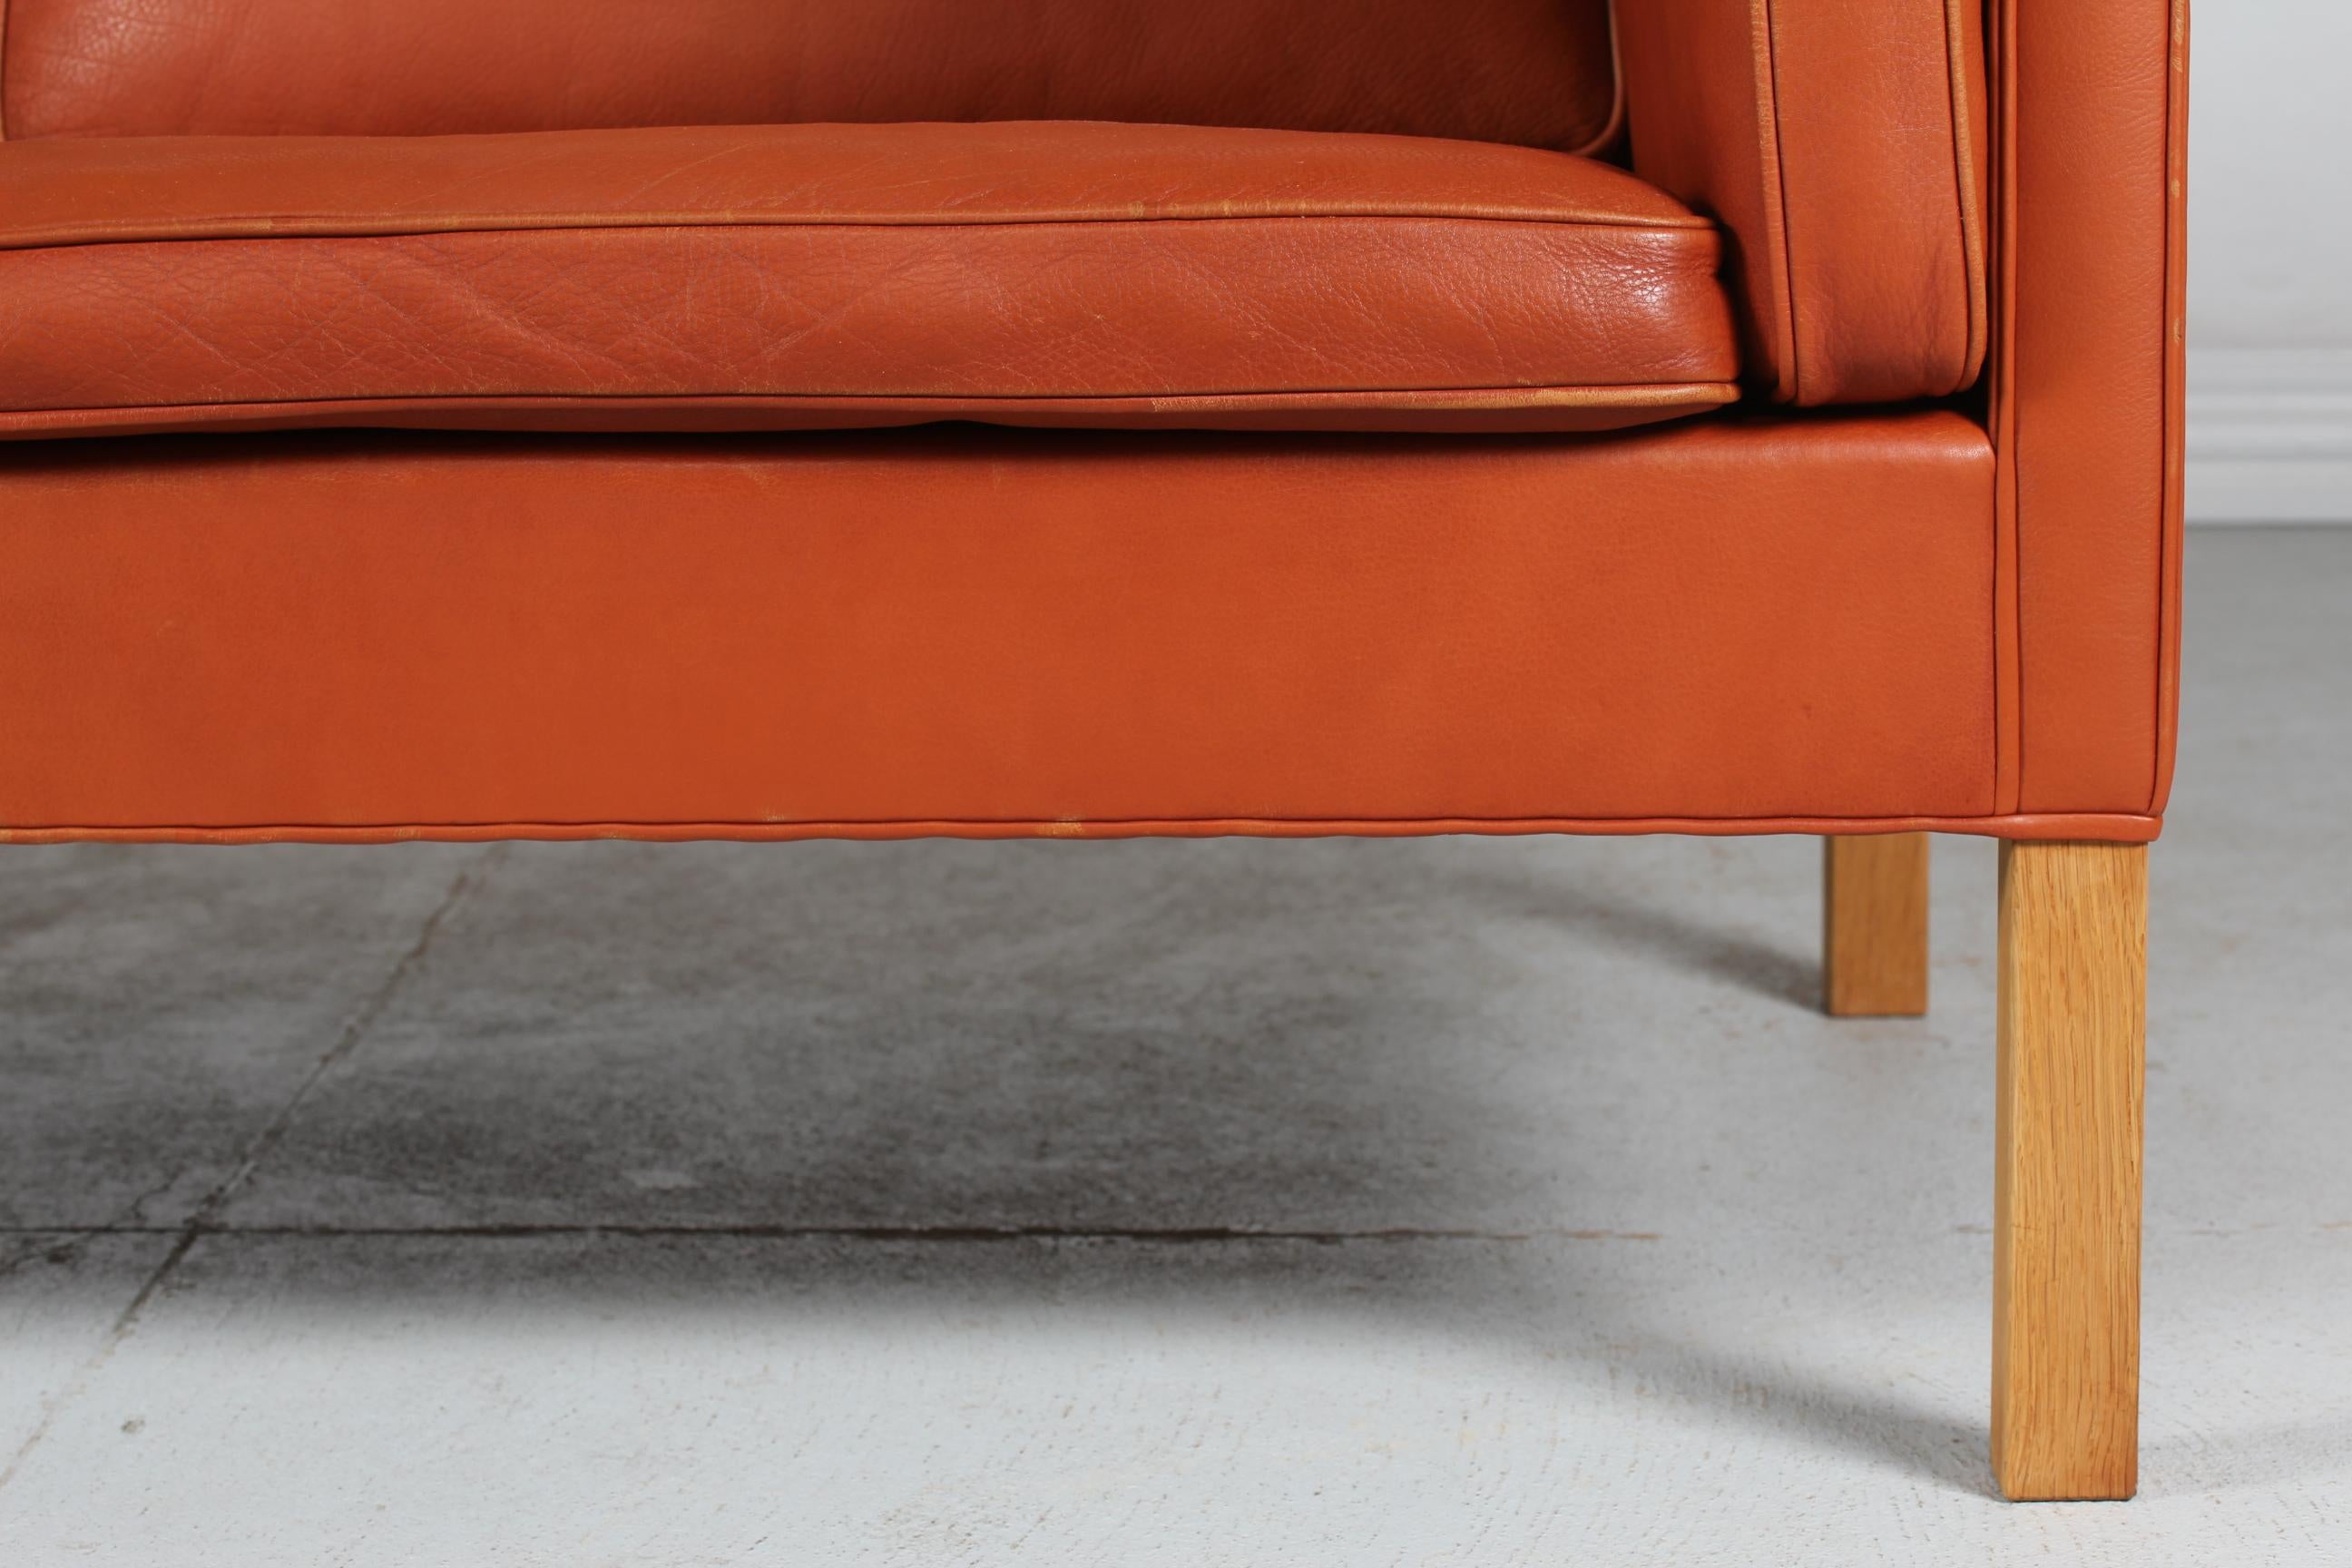 Late 20th Century Børge Mogensen Sofa 2212 Cognac Colored Leather and Oak by Fredericia Furniture